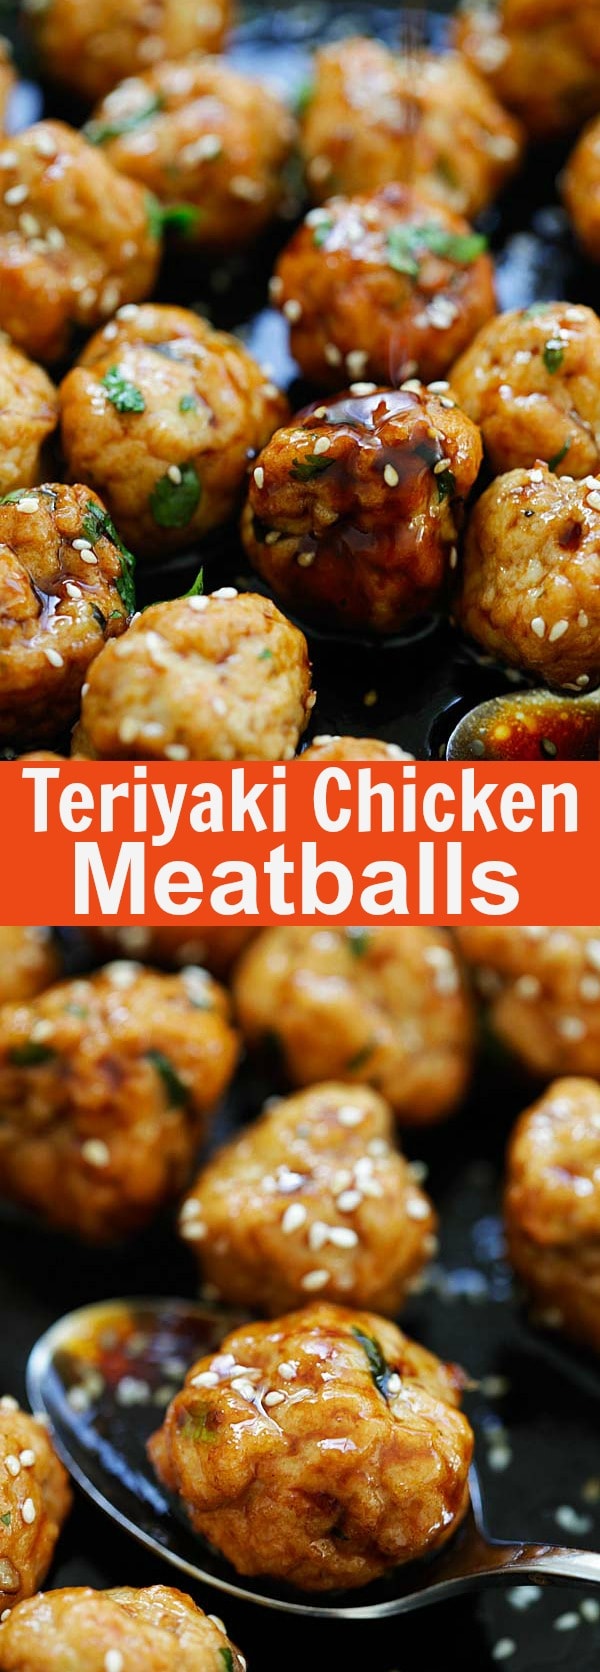 Teriyaki Chicken Meatballs - juicy and moist chicken meatballs with sweet and savory teriyaki sauce. These meatballs are so good you'll want them every day | rasamalaysia.com